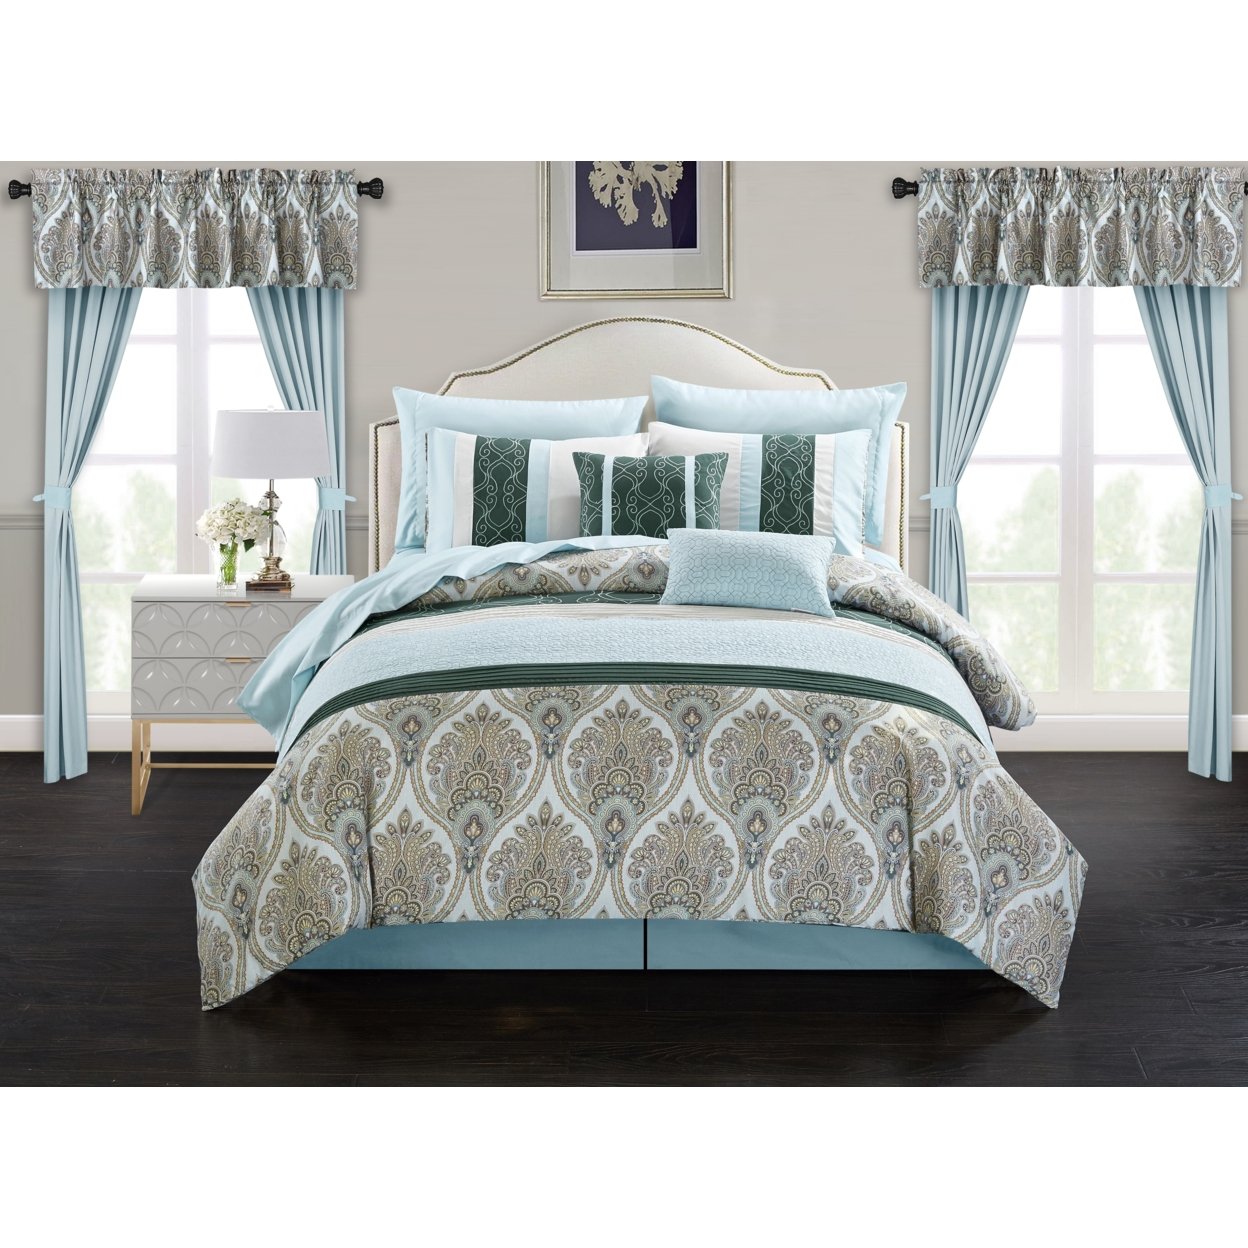 Vivaldi 20 Piece Comforter Set Medallion Quilted Embroidered Design Bed in a Bag Bedding - Aqua, Queen